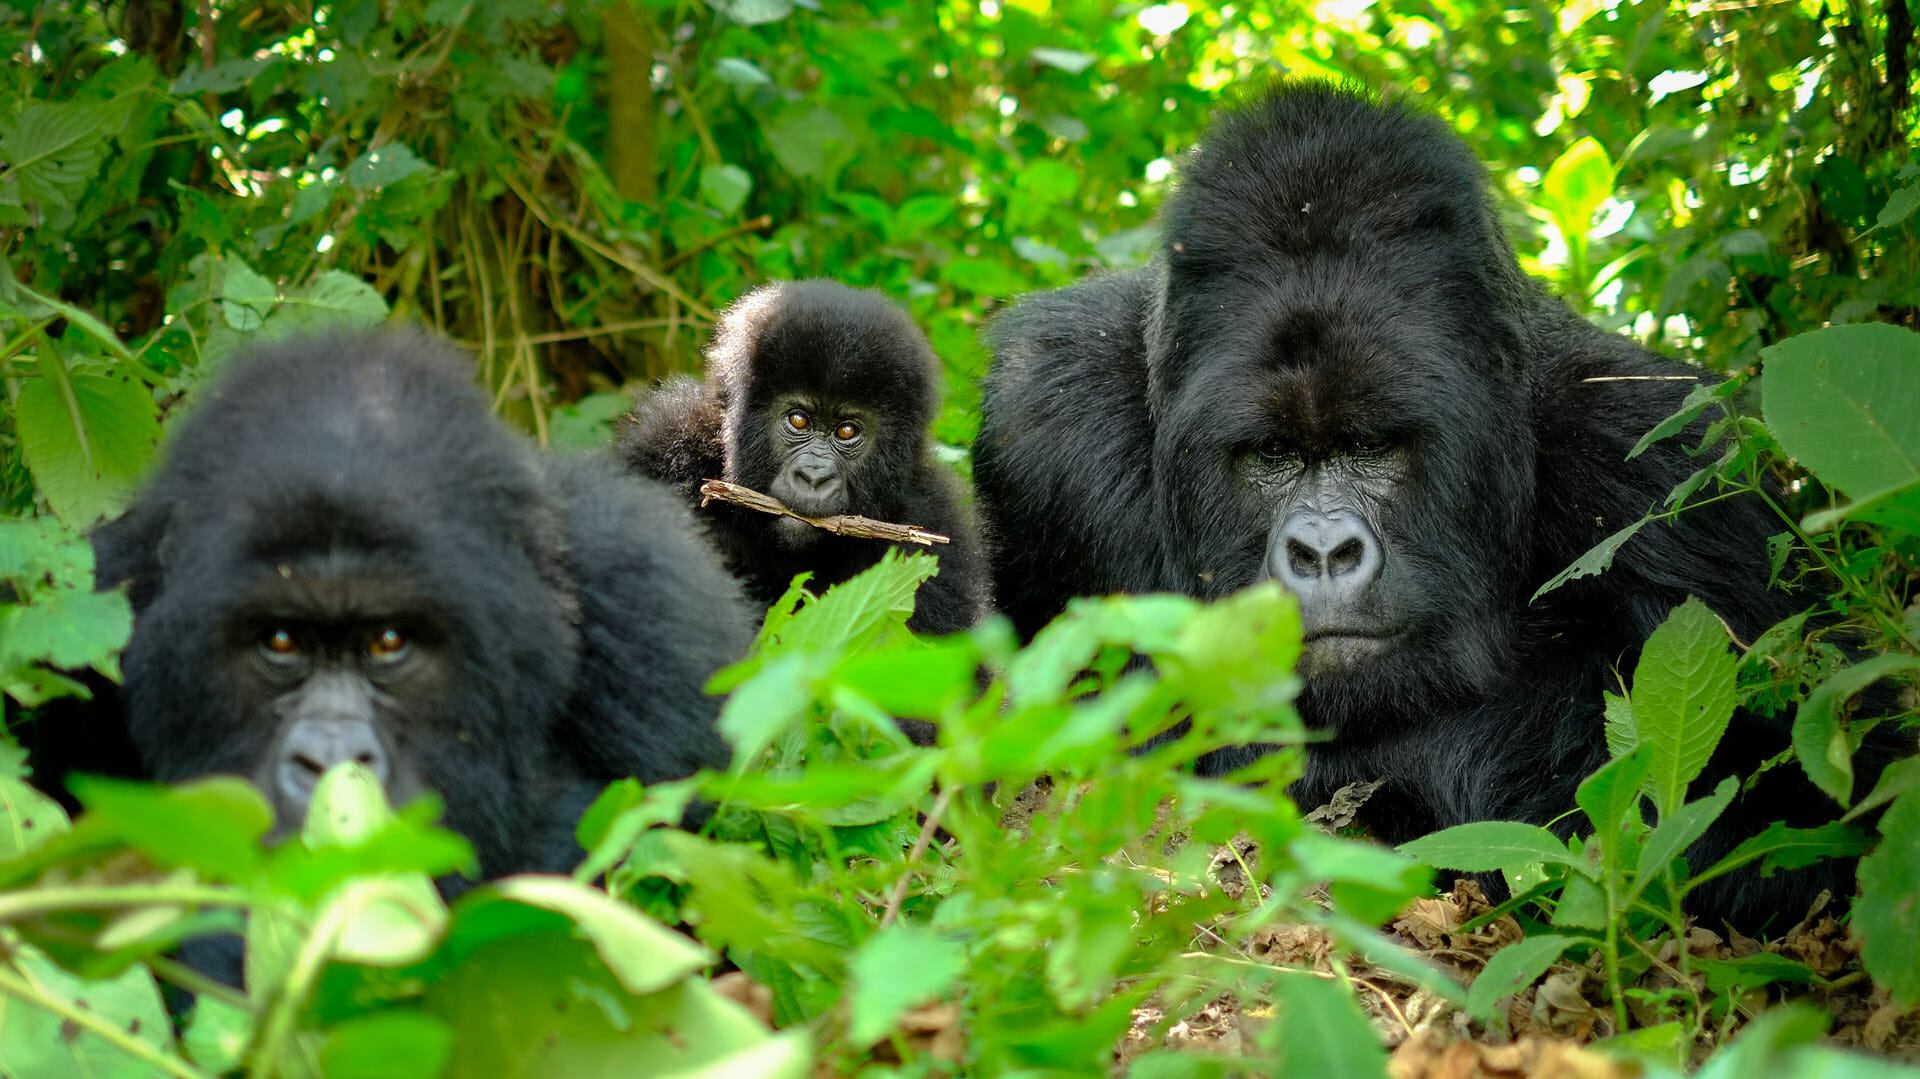 Family of mountain gorillas with a baby gorilla and a silverback, Volcanoes National Park, Rwanda